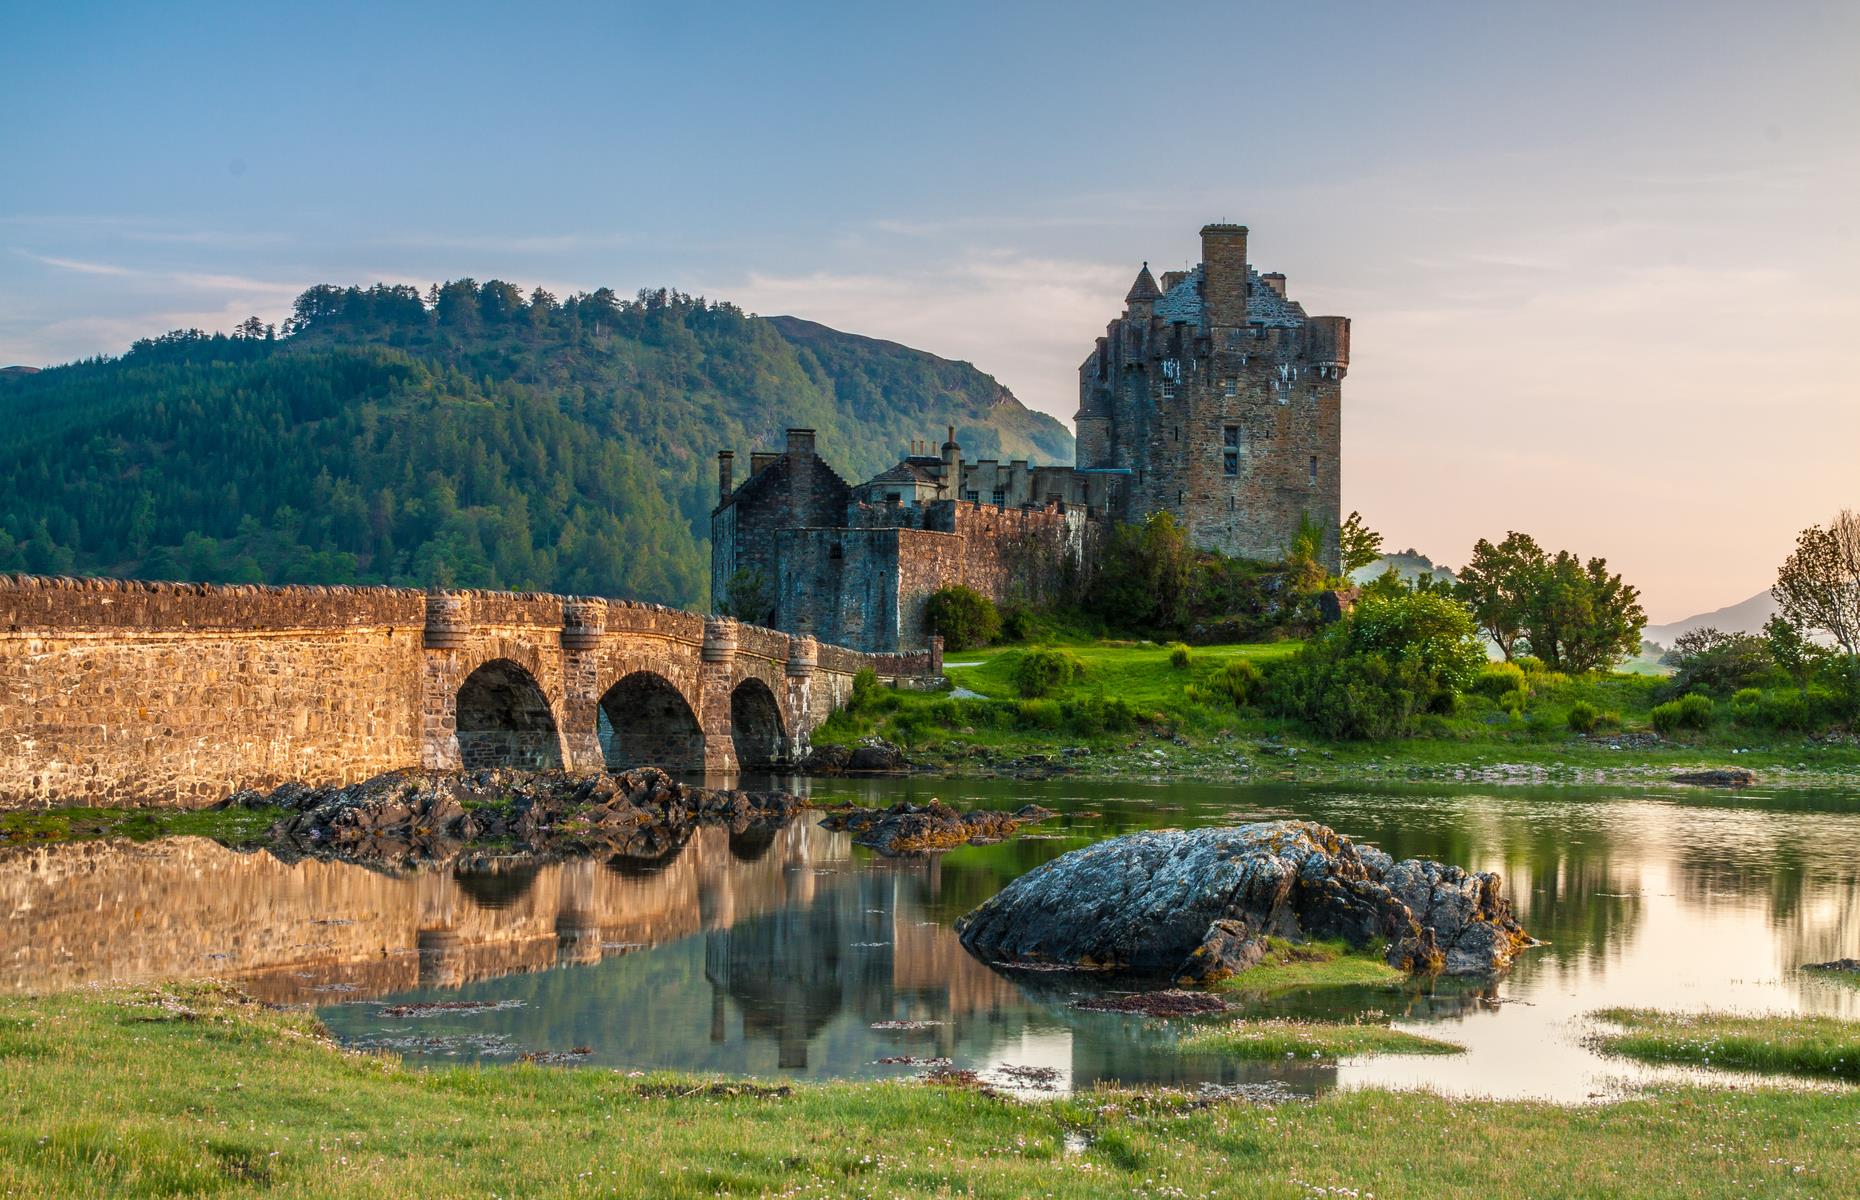 <p>The stunning lochside Eilean Donan Castle, constructed in the 13th century to protect the lands of Kintail from the Vikings, was one of a few Scottish strongholds that provided producers with the model for Castle DunBroch in <em>Brave</em>. The film is set in a fictional Scottish Highlands landscape during the Middle Ages. The team also visited and were inspired by Dunnottar Castle on the cliffs of Stonehaven and the Calanais Standing Stones on the Isle of Lewis. </p>